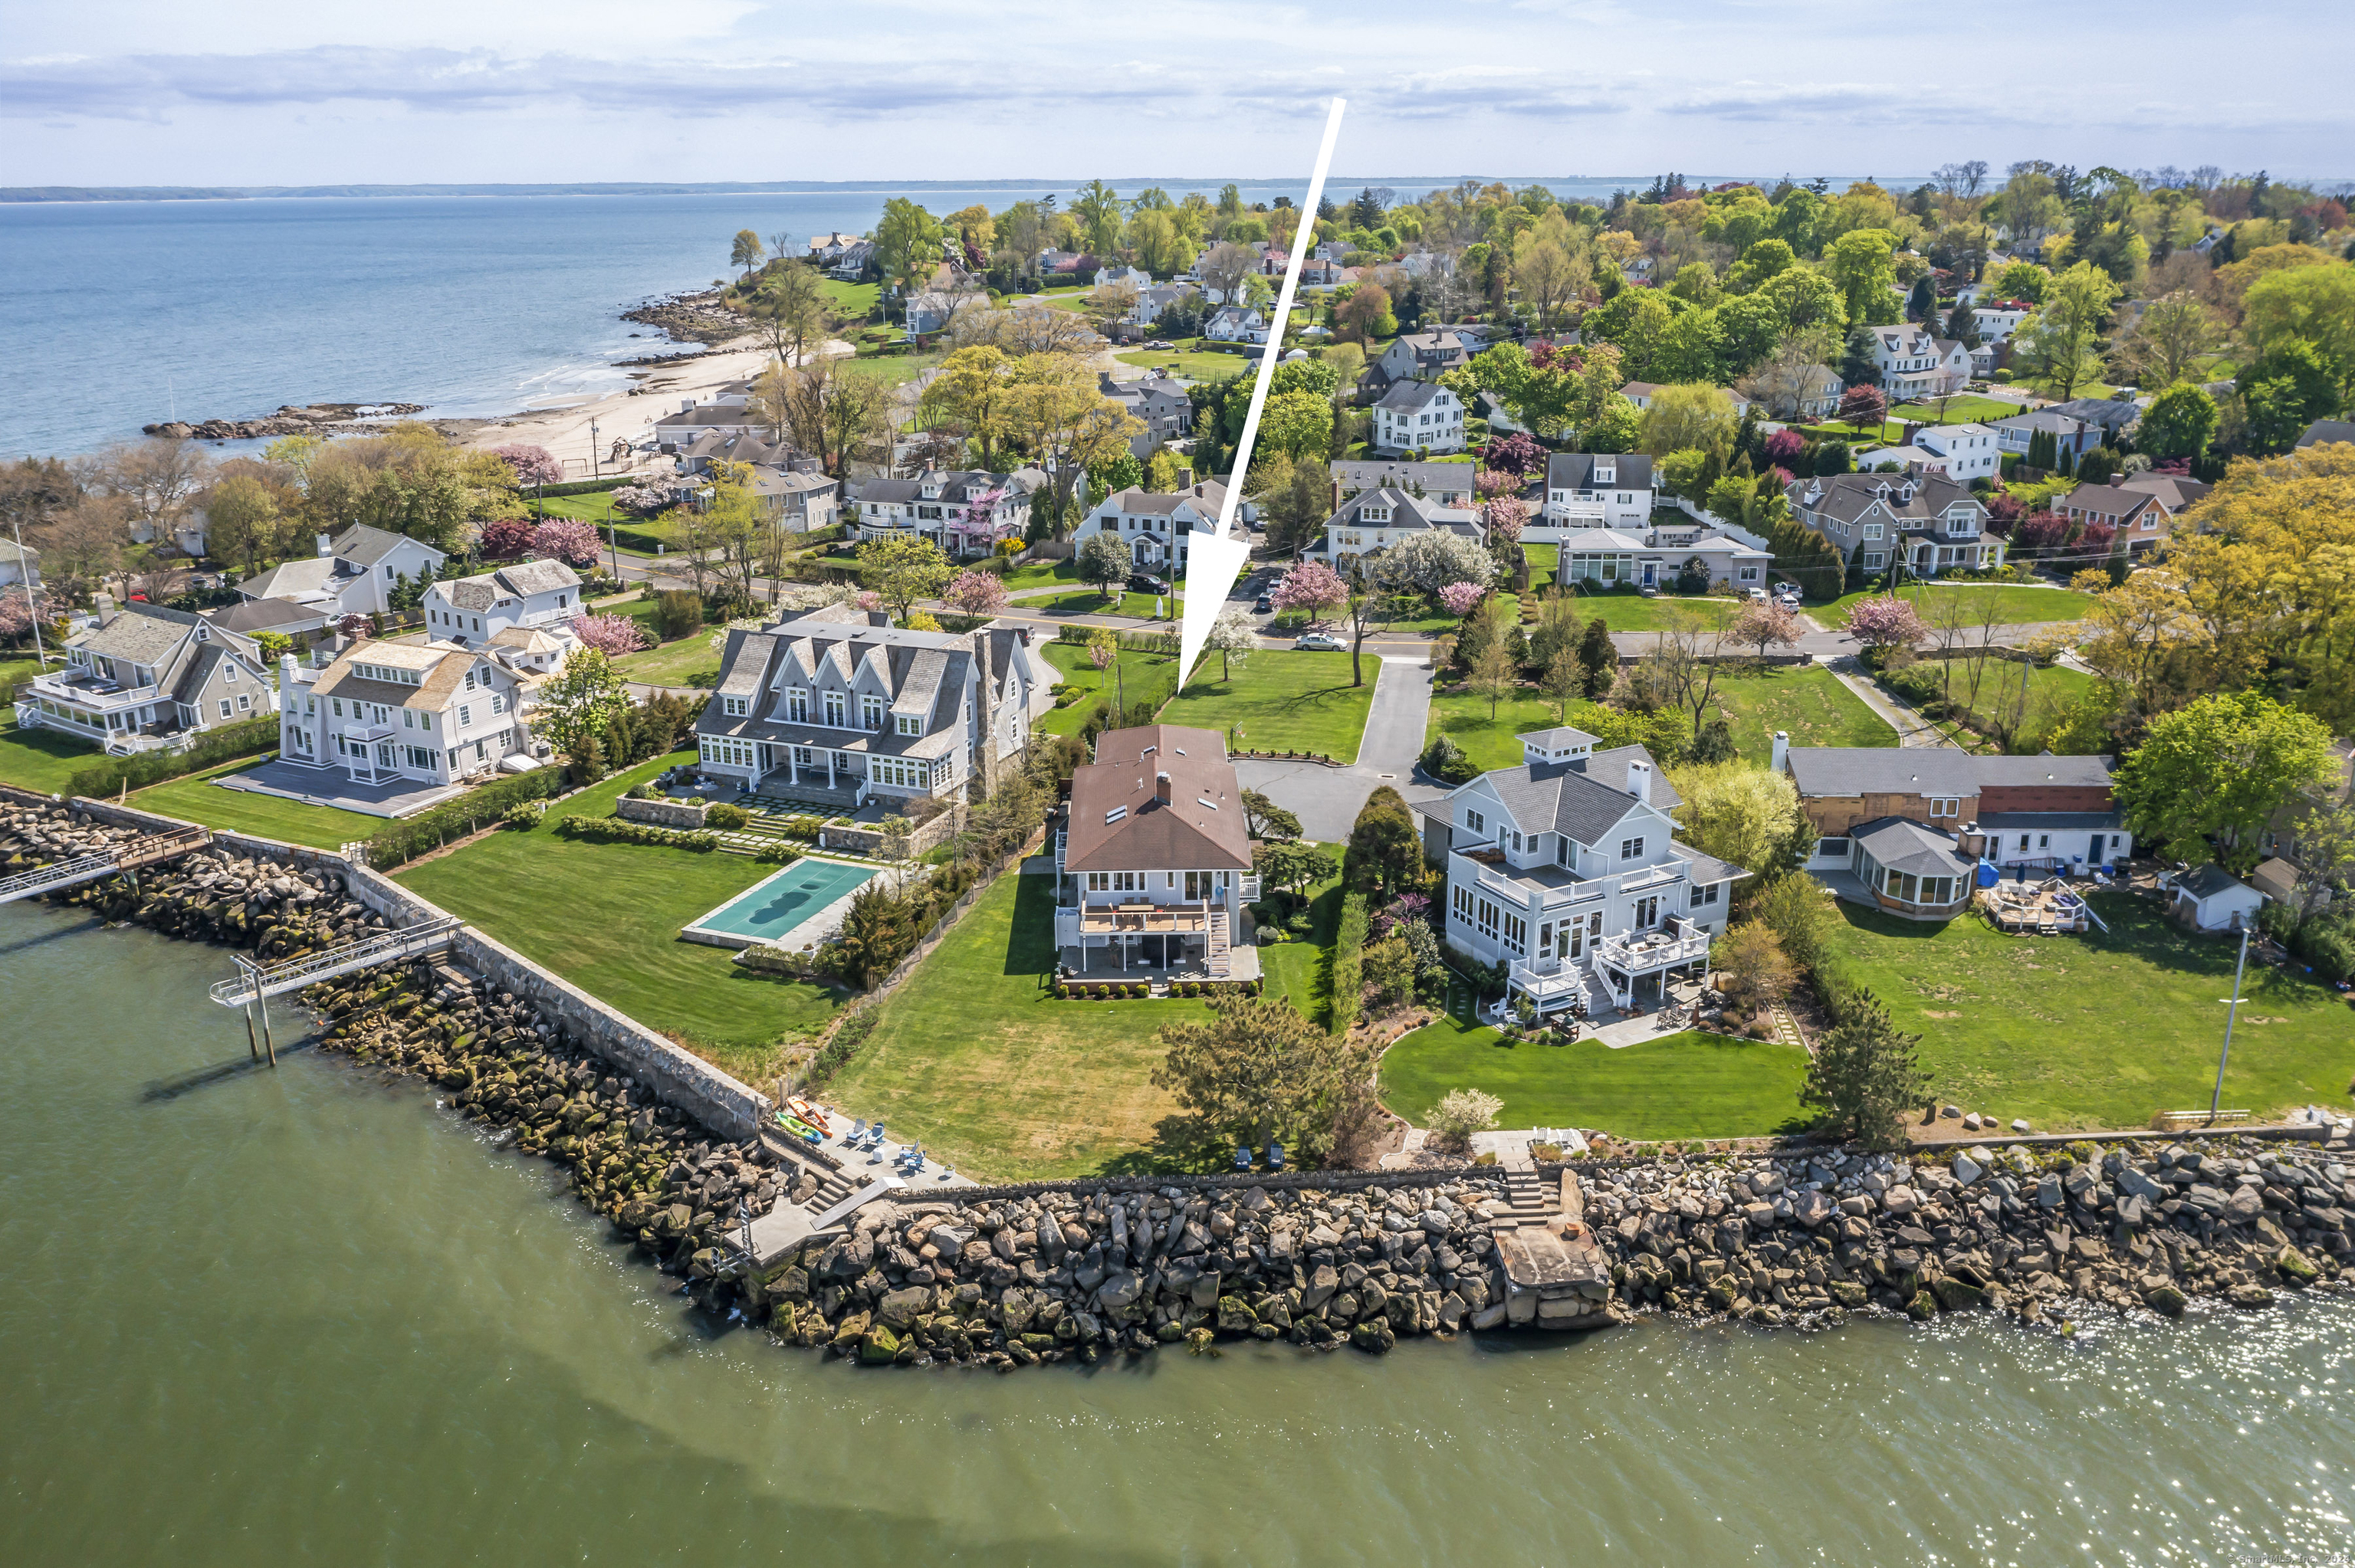 Rental Property at 70 Sea Beach Drive, Stamford, Connecticut - Bedrooms: 4 
Bathrooms: 5 
Rooms: 10  - $14,000 MO.